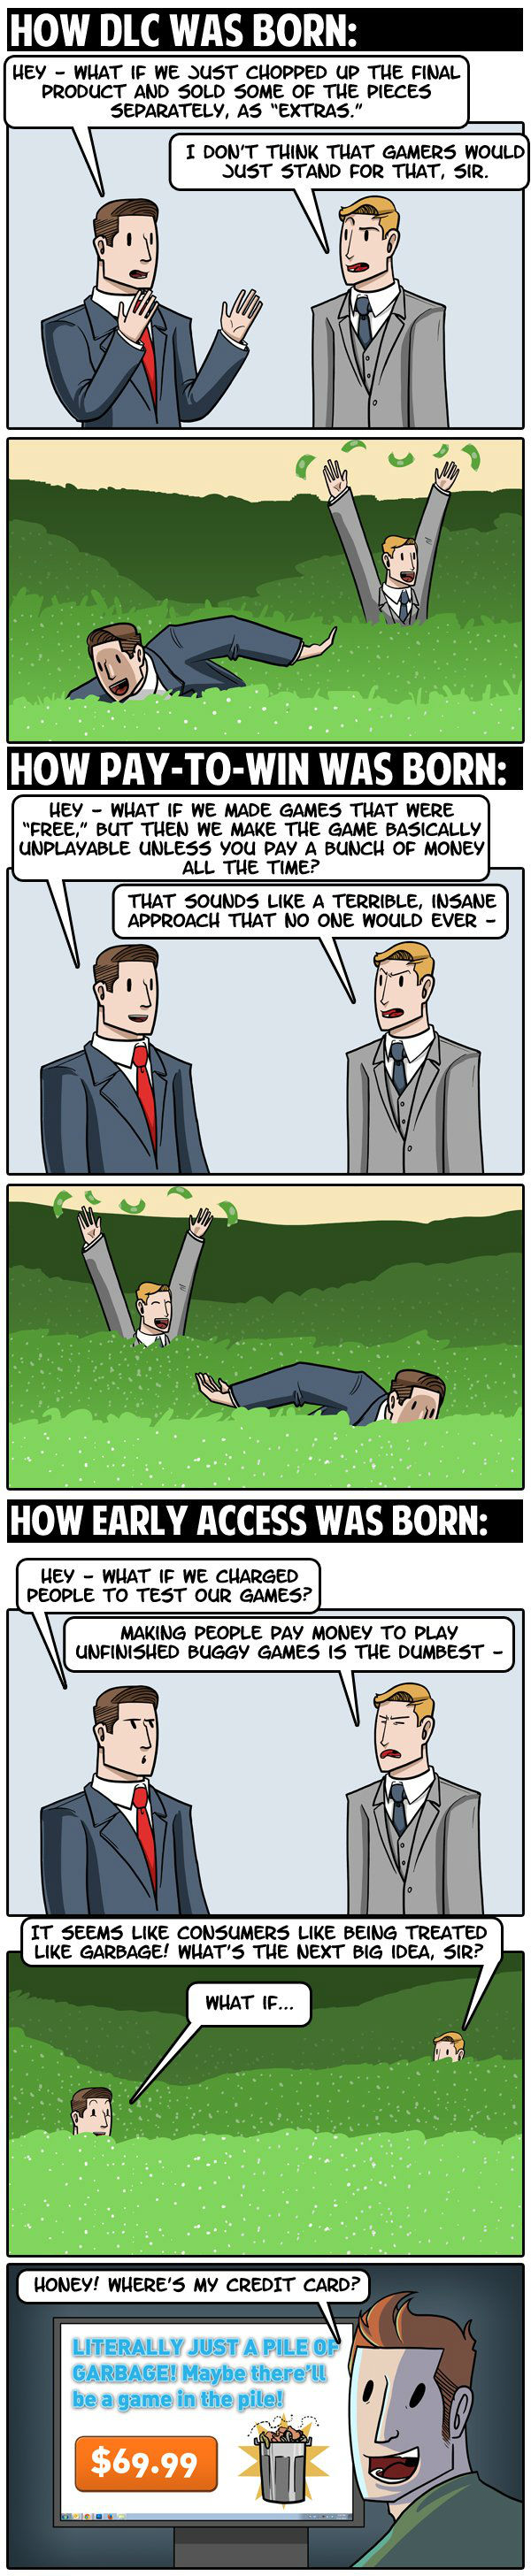 funny-pictures-how-dlc-was-born-gaming-comic.jpg